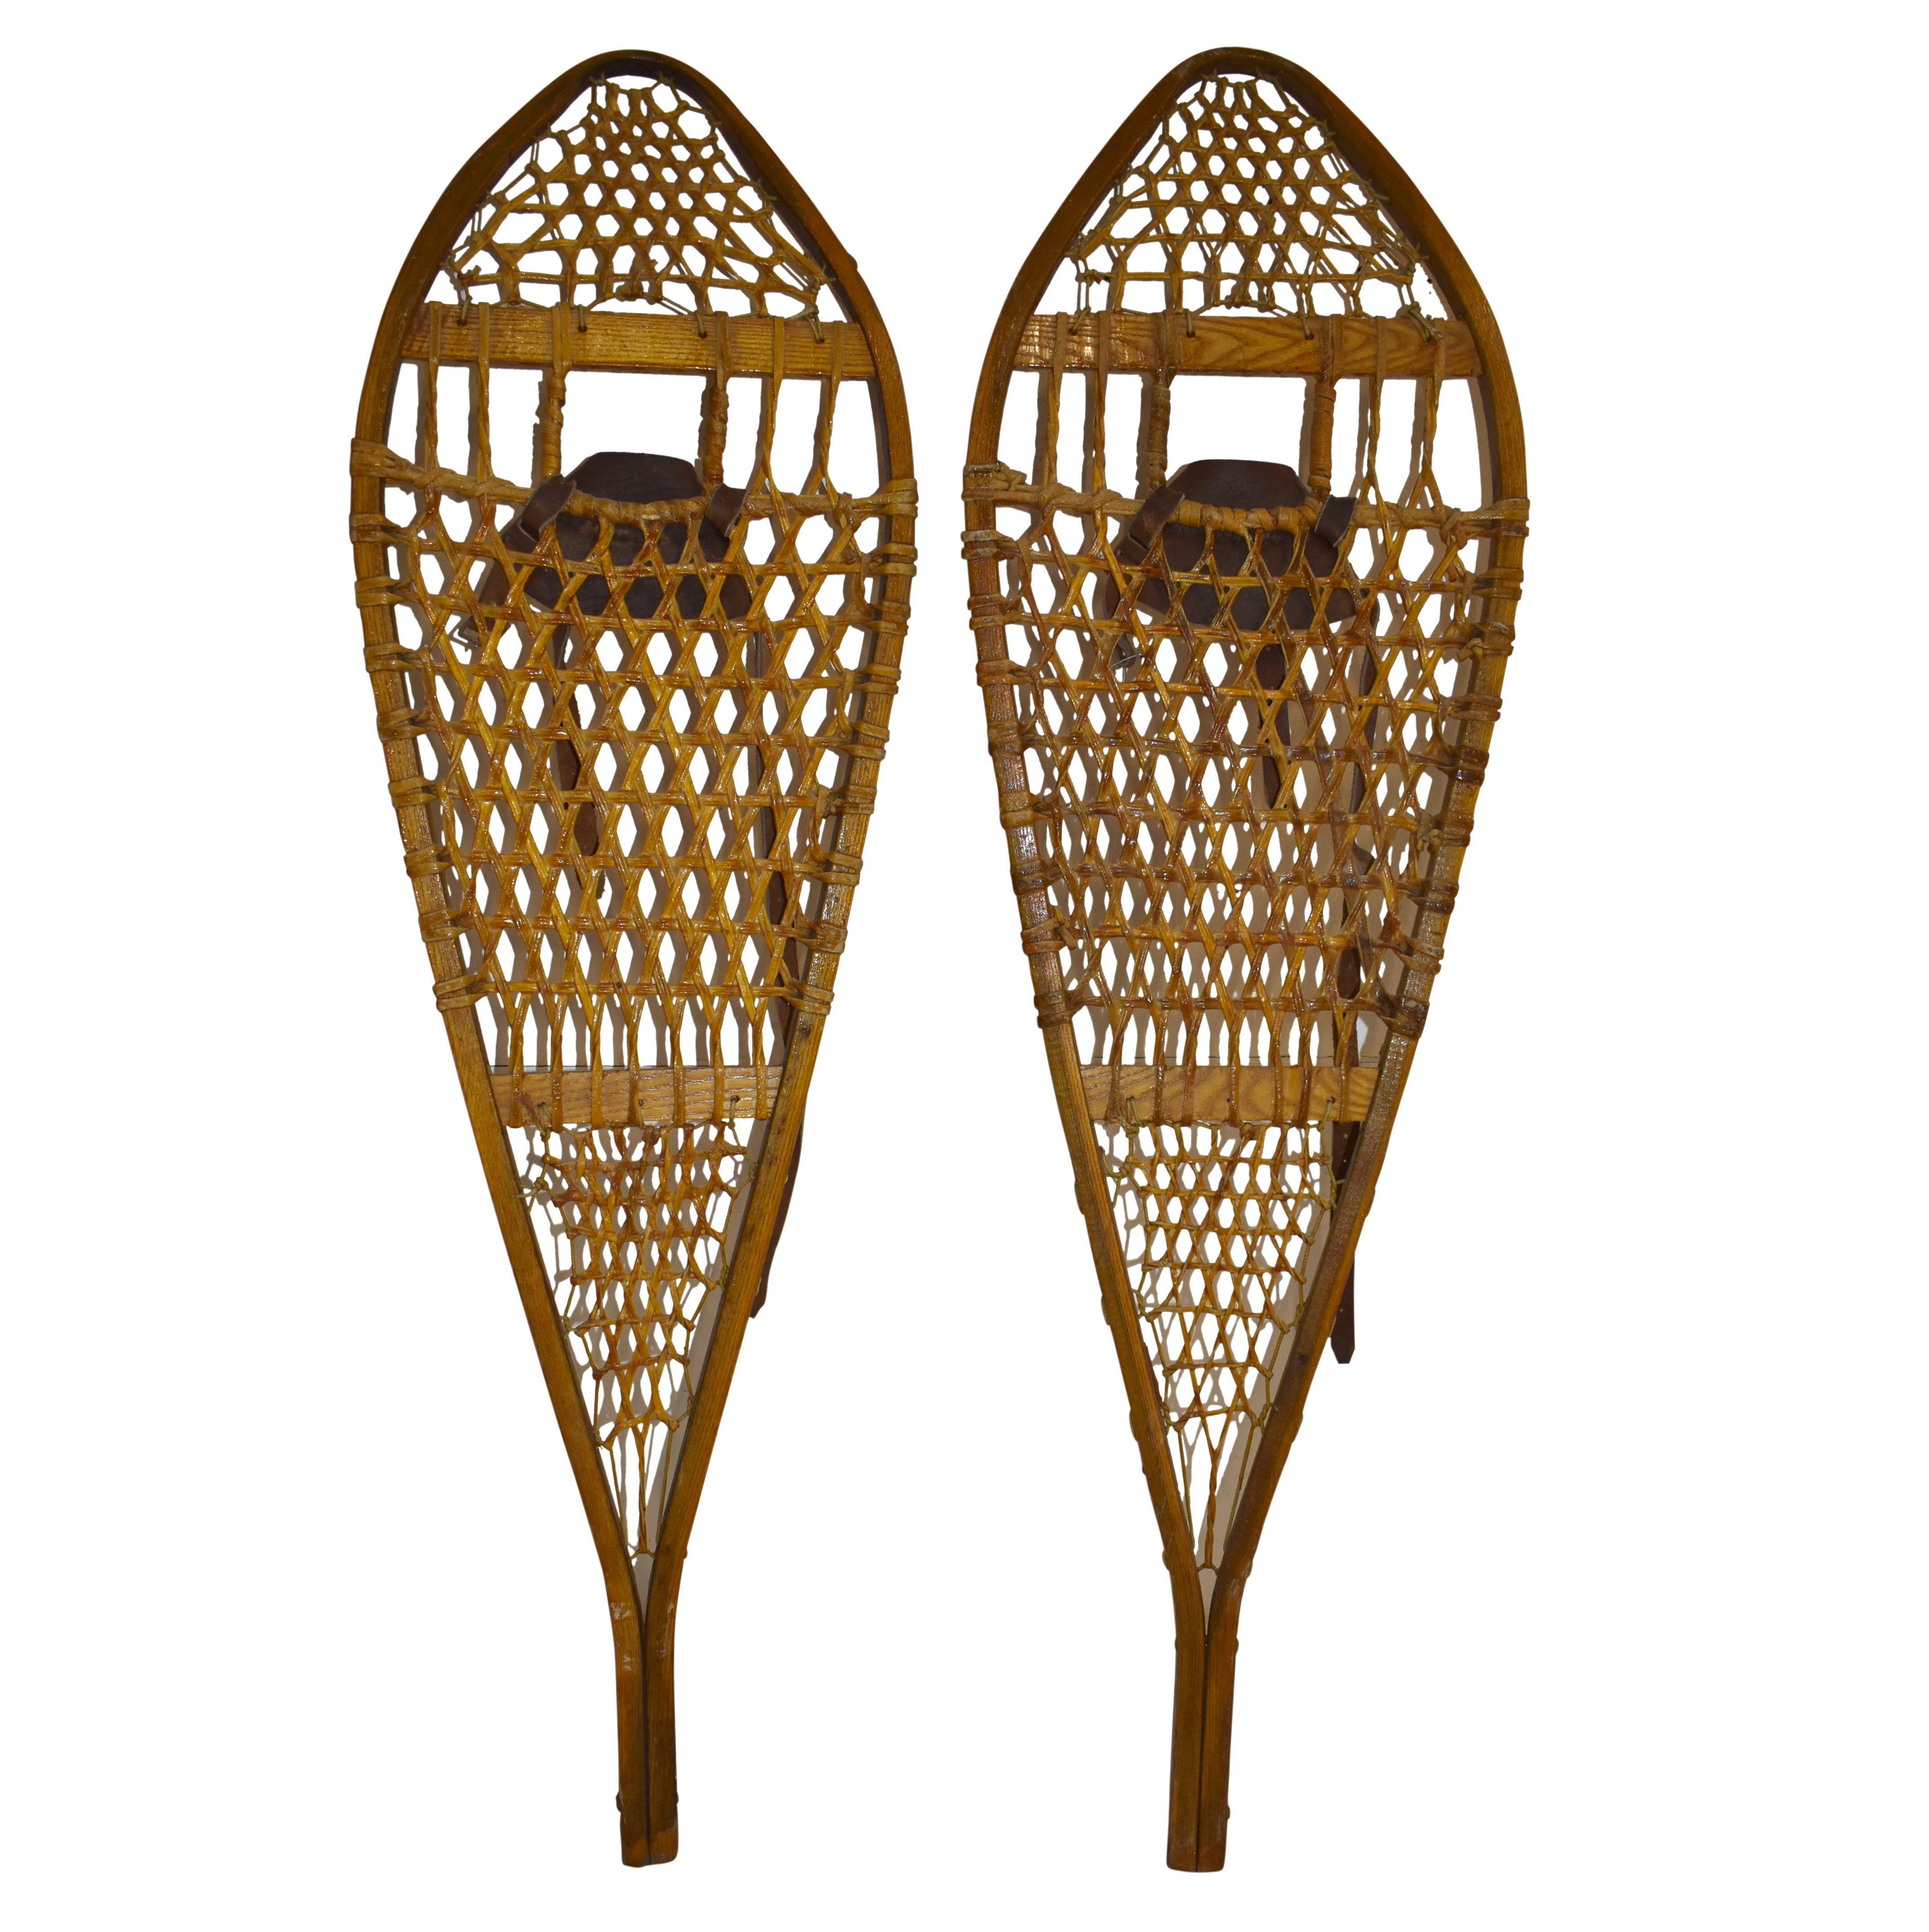 Canadian Huron Snowshoes by Torpedo